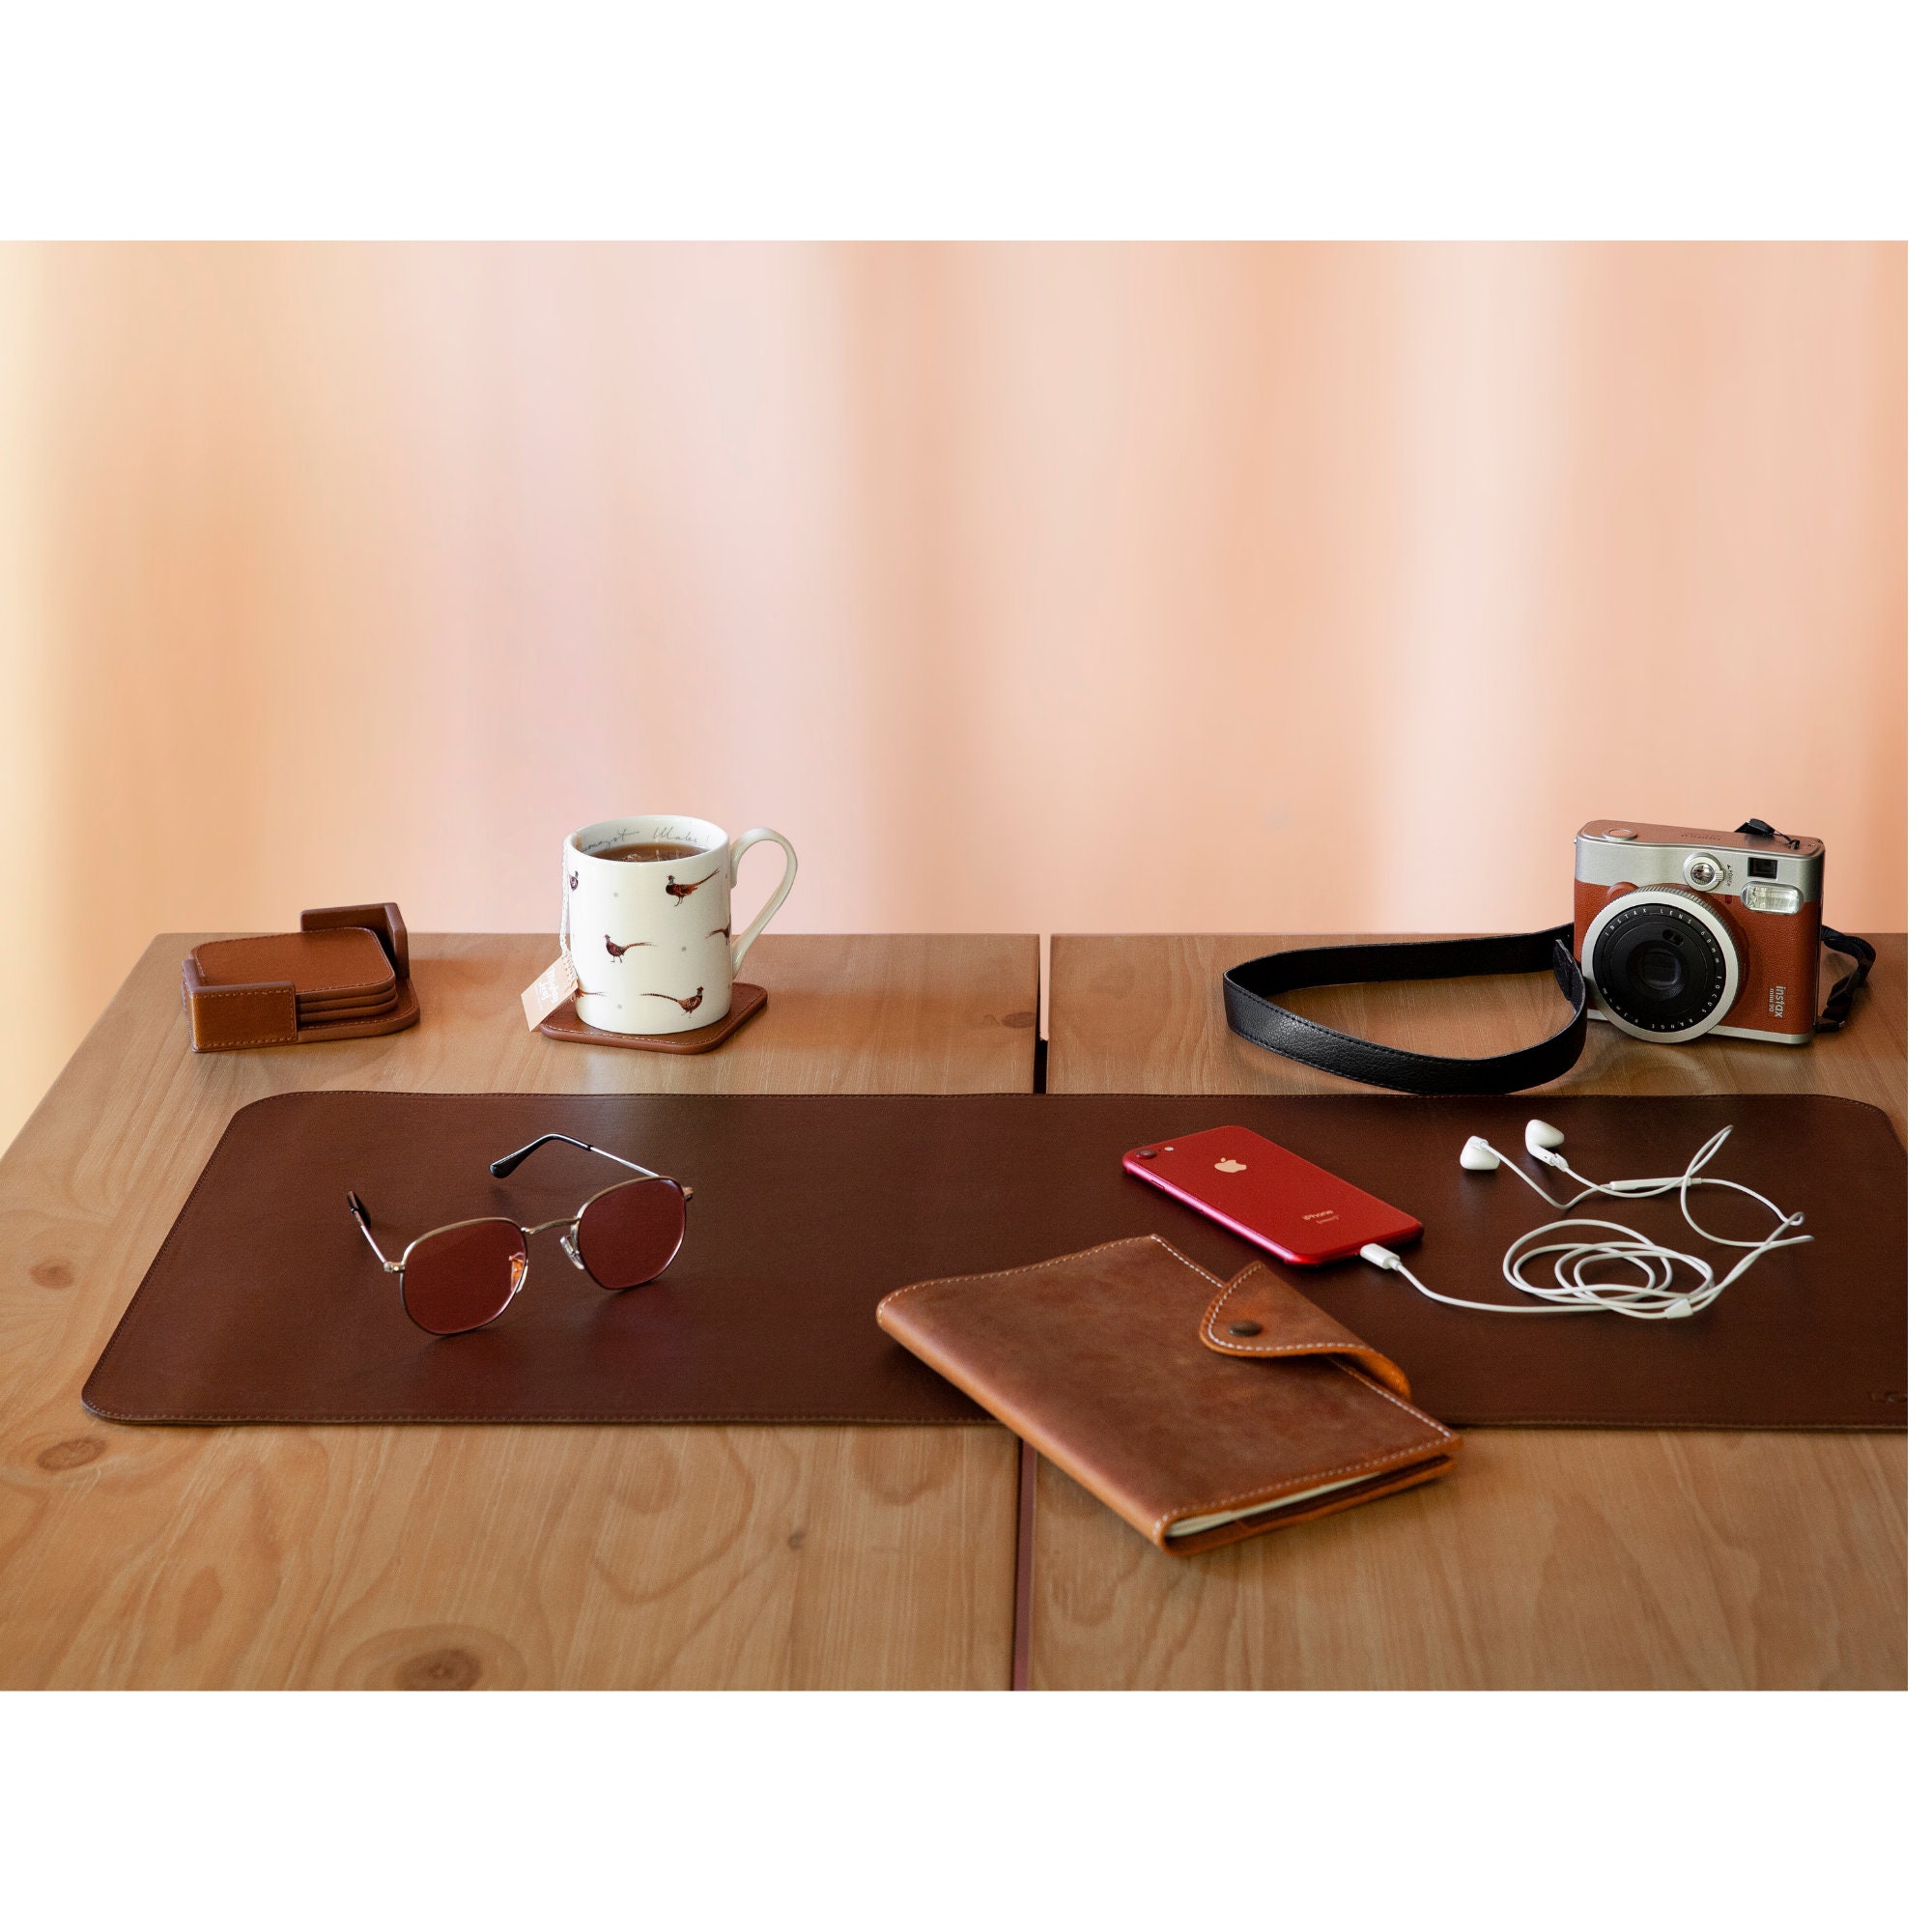 Leather Mouse Pads  Personalized Mouse Pads – MegaGear Store